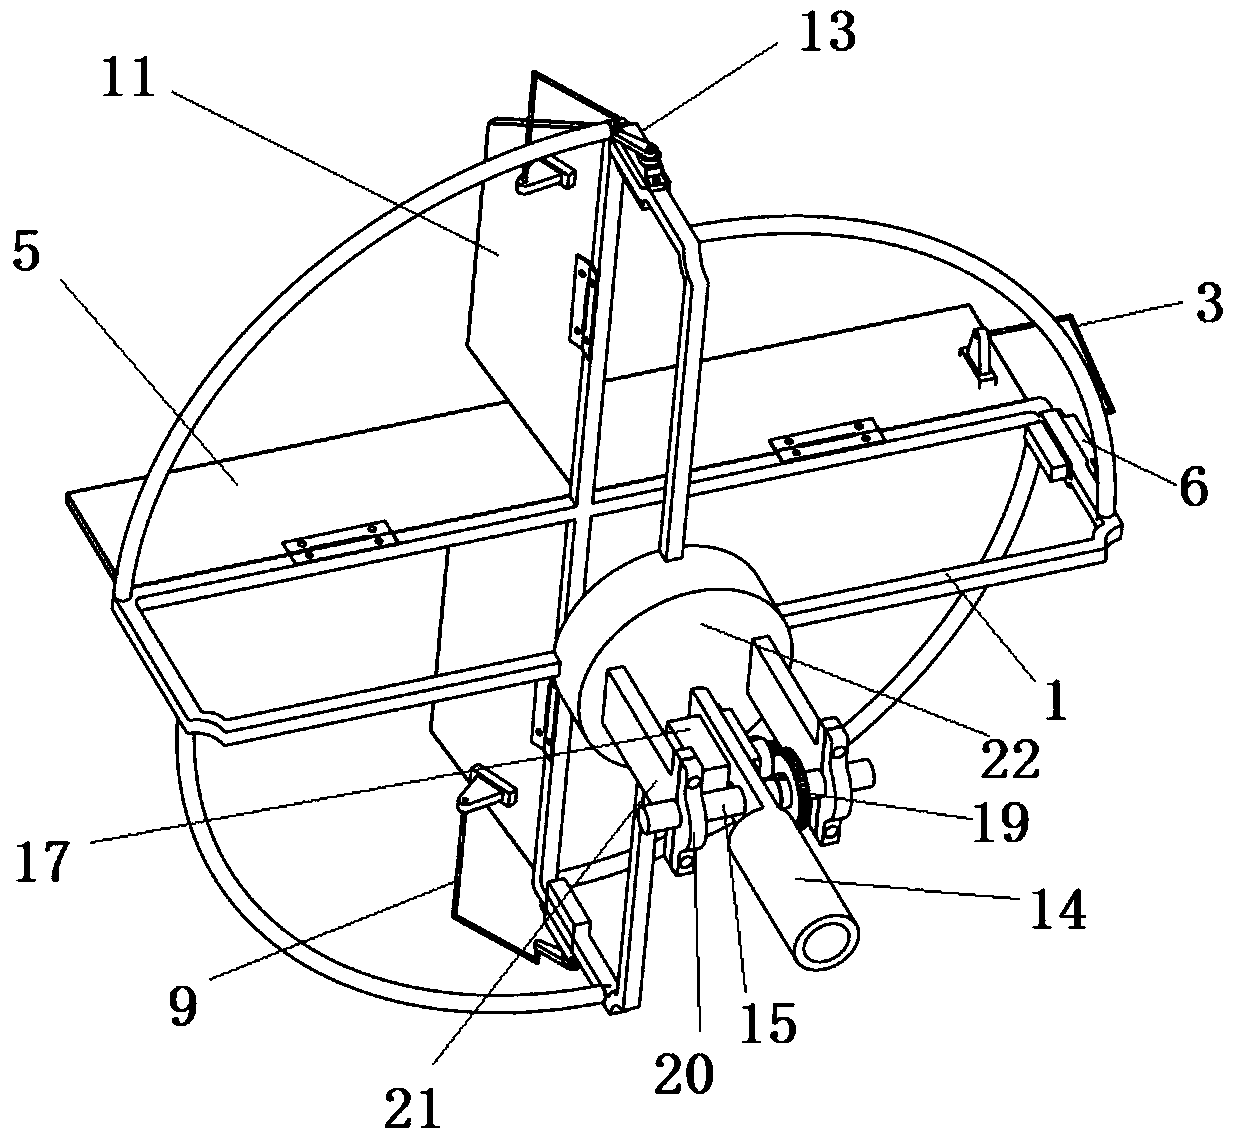 Tilting mechanism with control surface